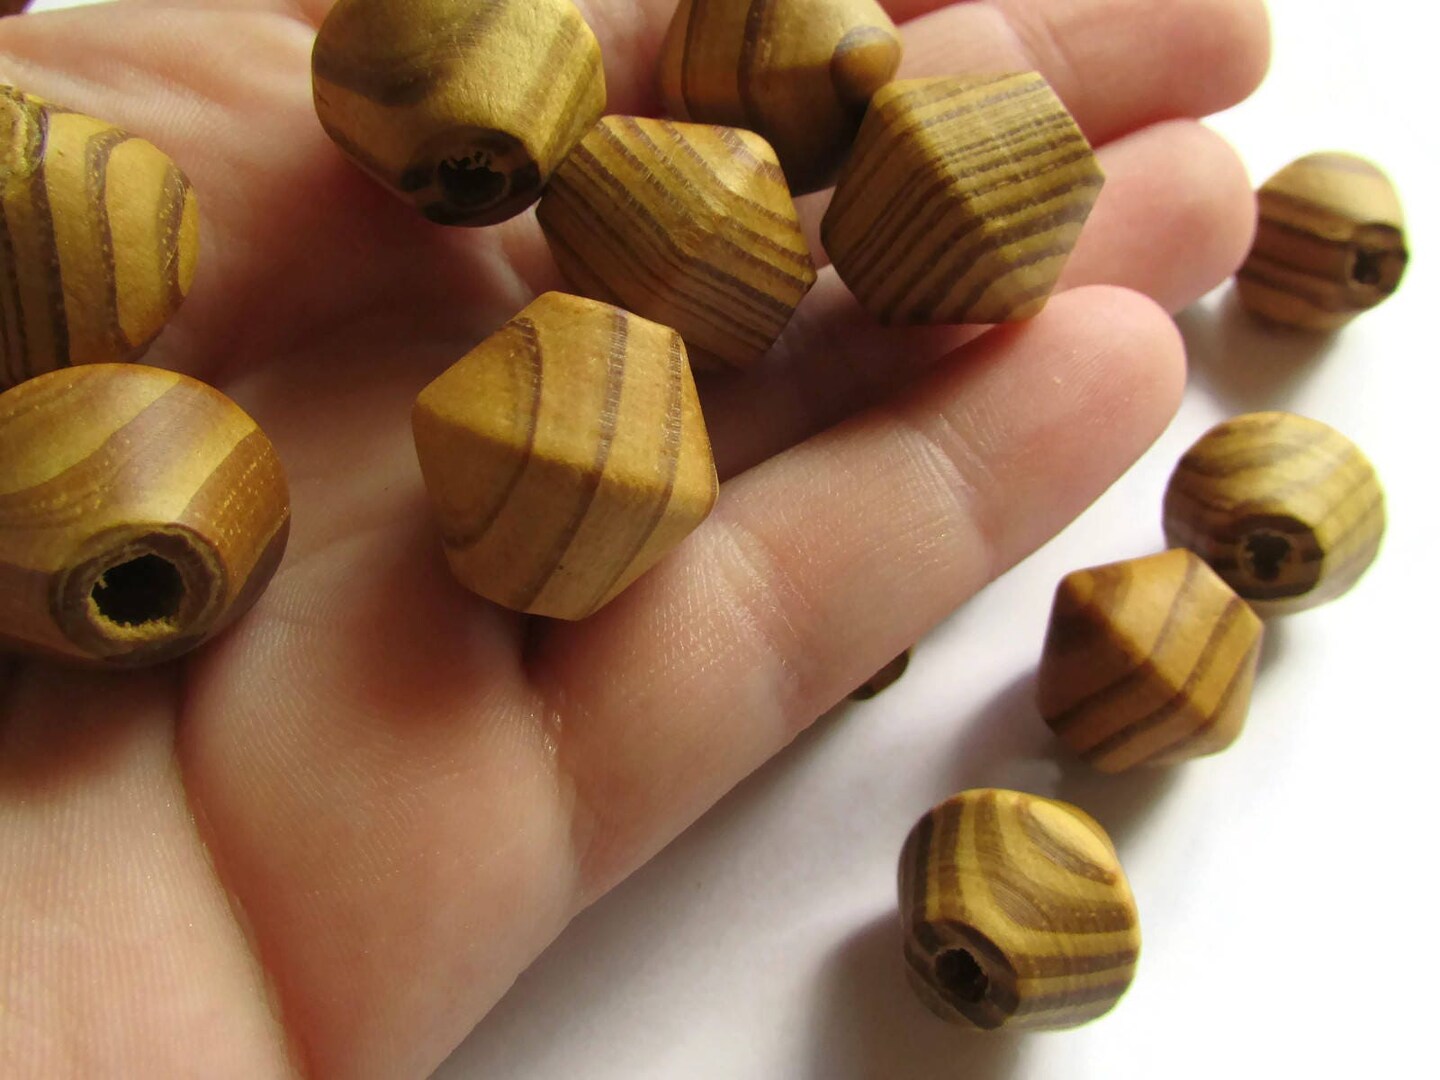 20 17mm Large Brown Wooden Bicone Beads bH3